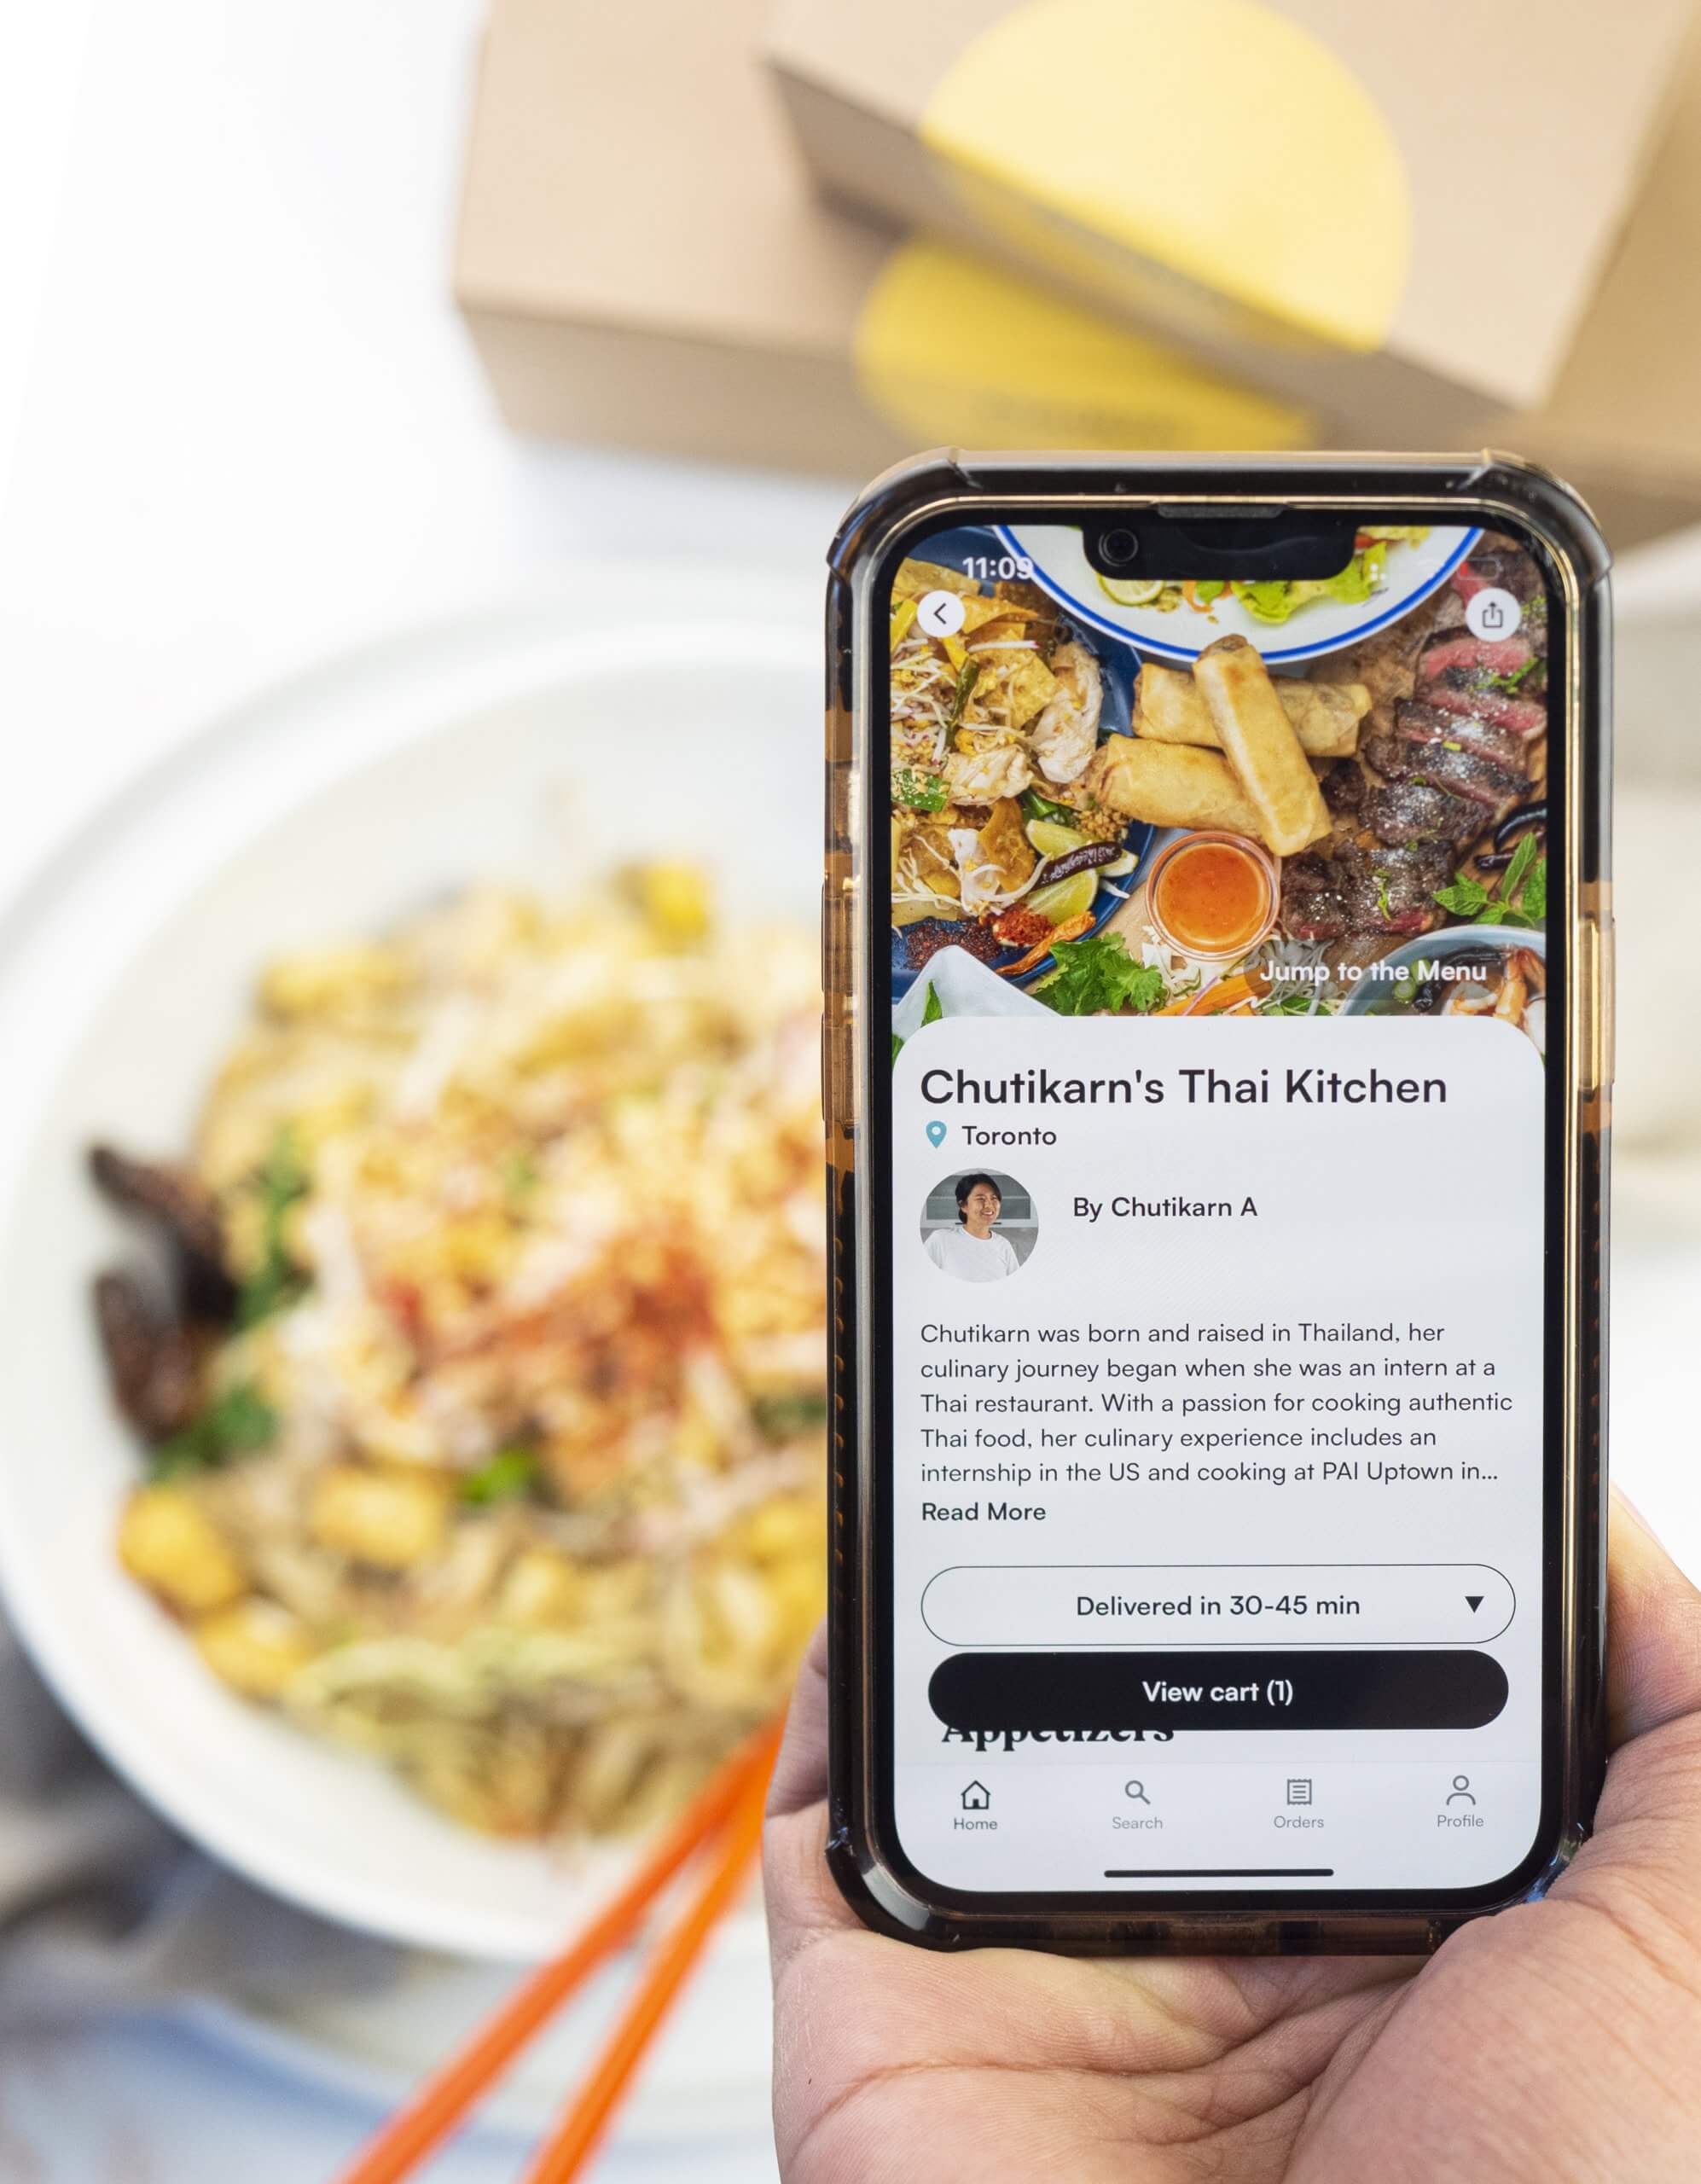 A phone with an order app held in front of food